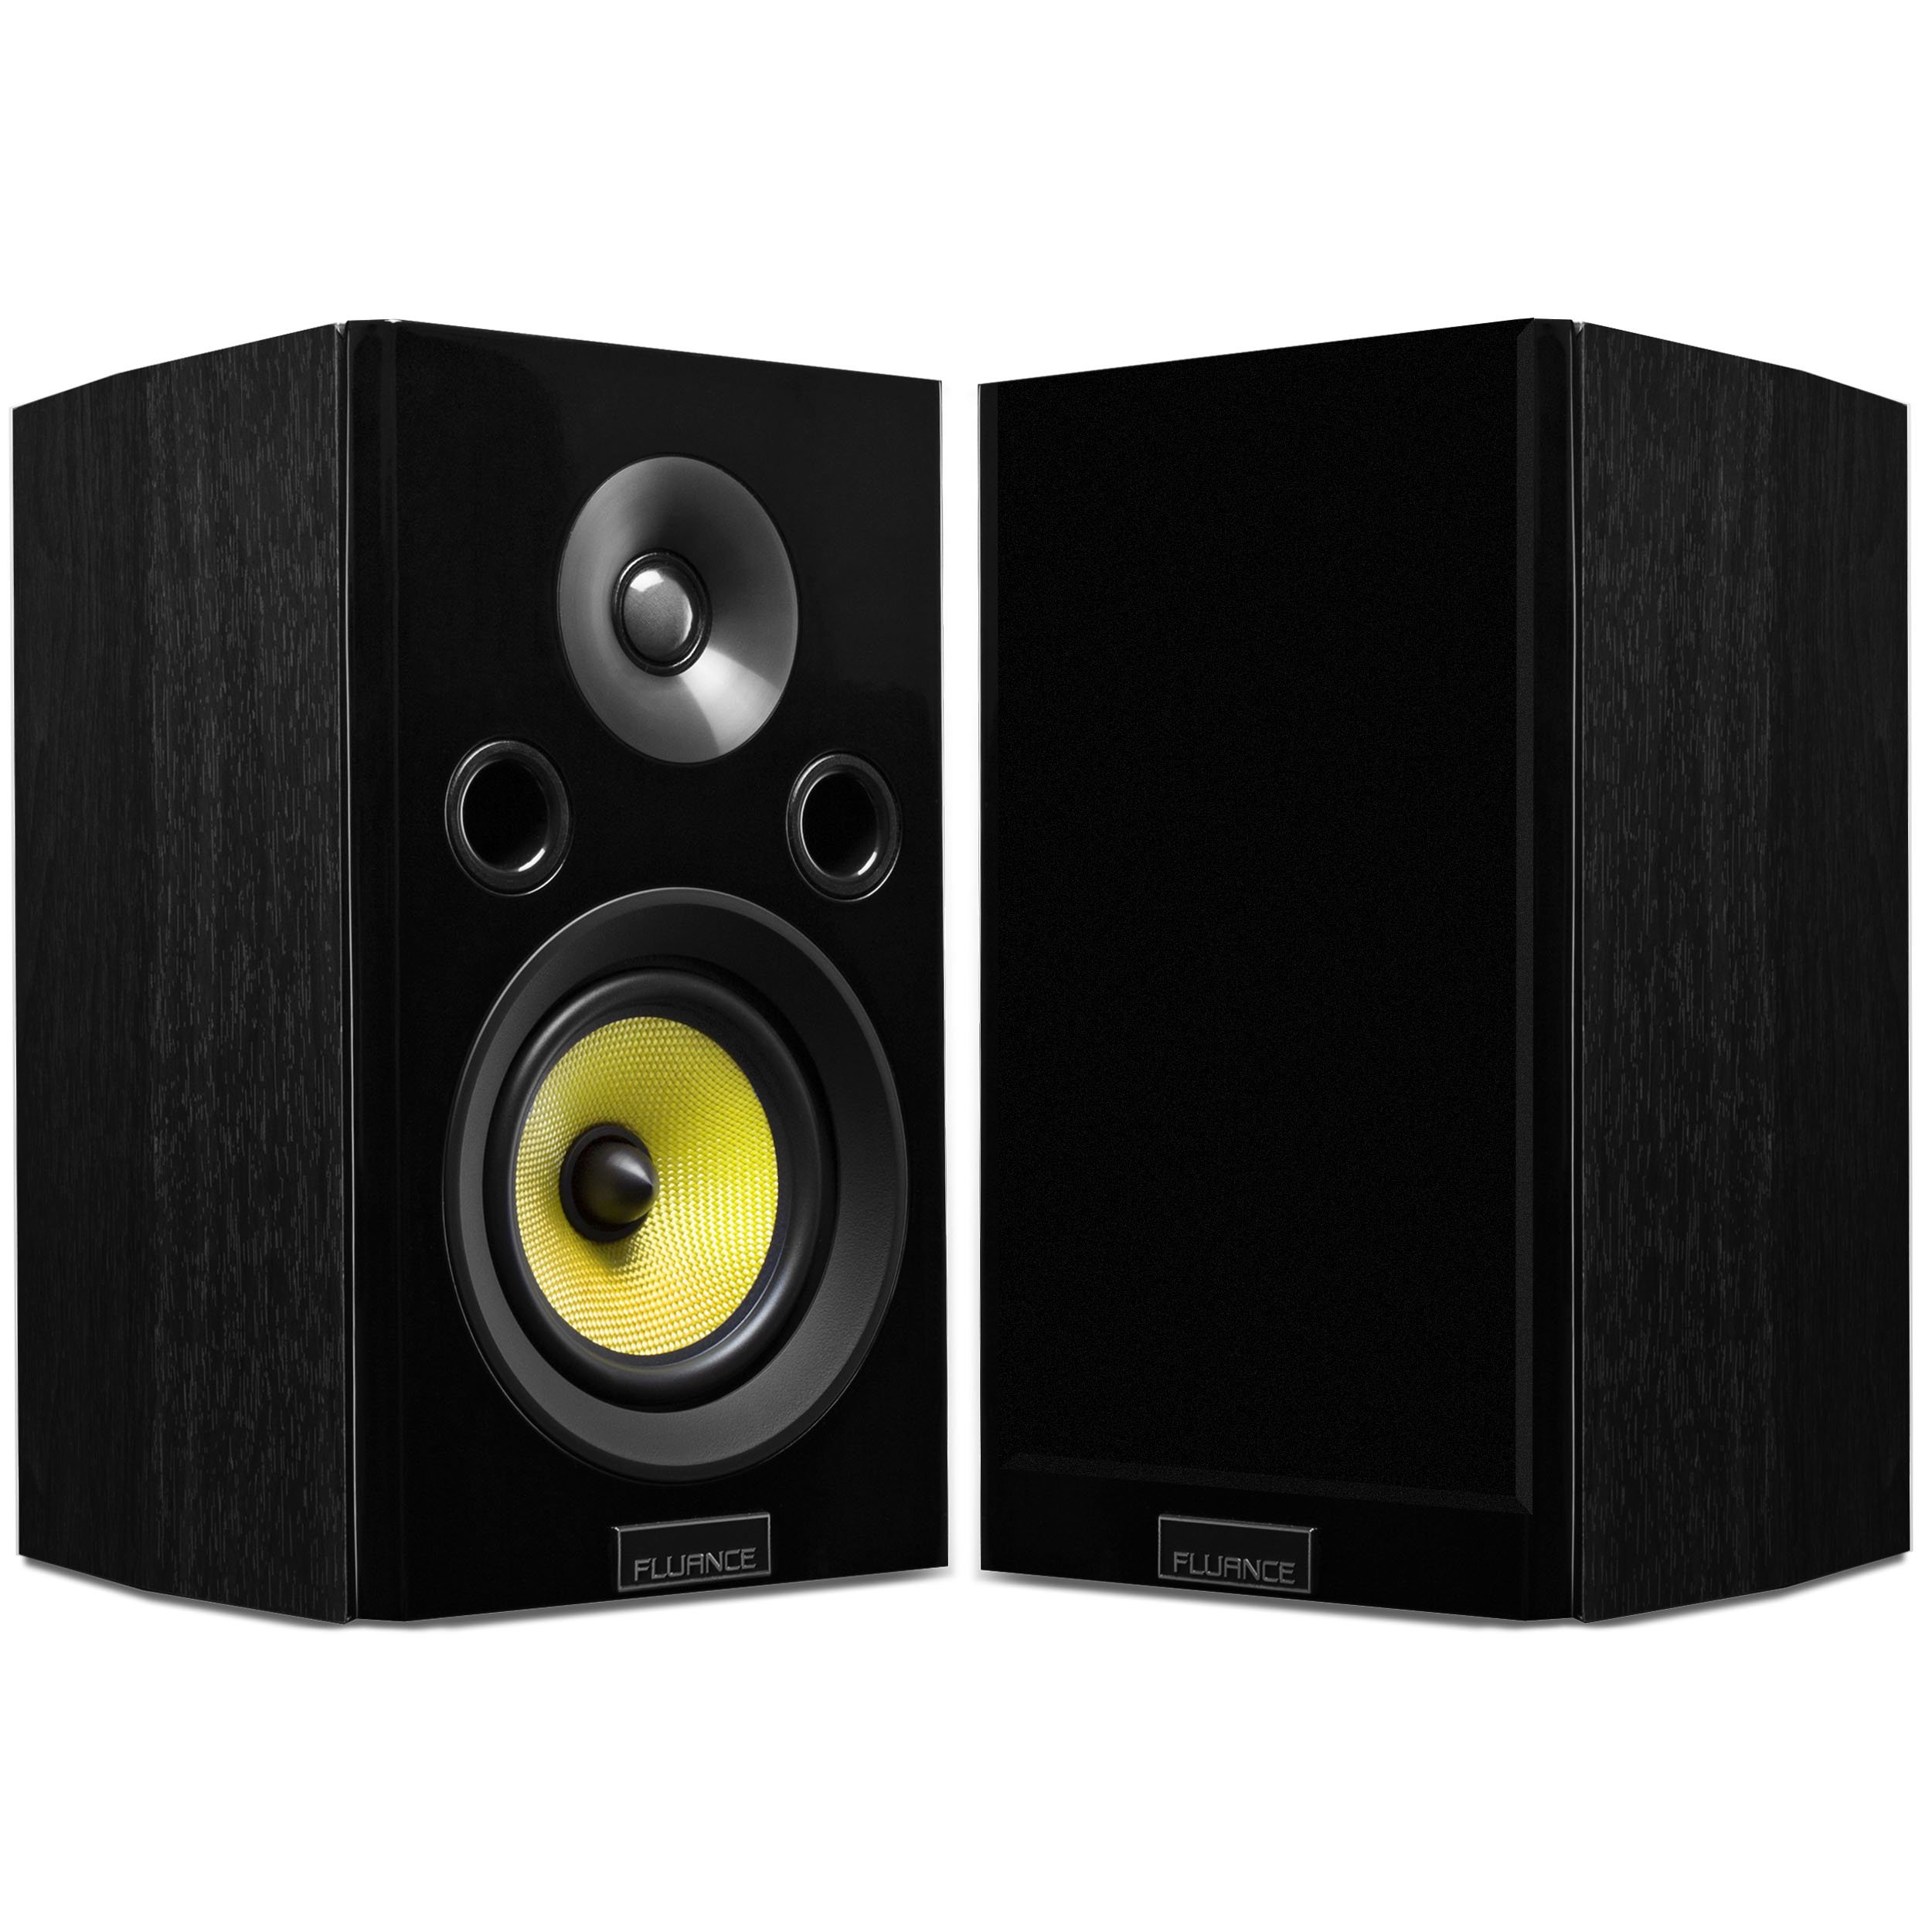 Fluance سلسلة Signature Series HiFi Two-Way Bookshelf Surround Speakers for Home Theatre and Music Systems